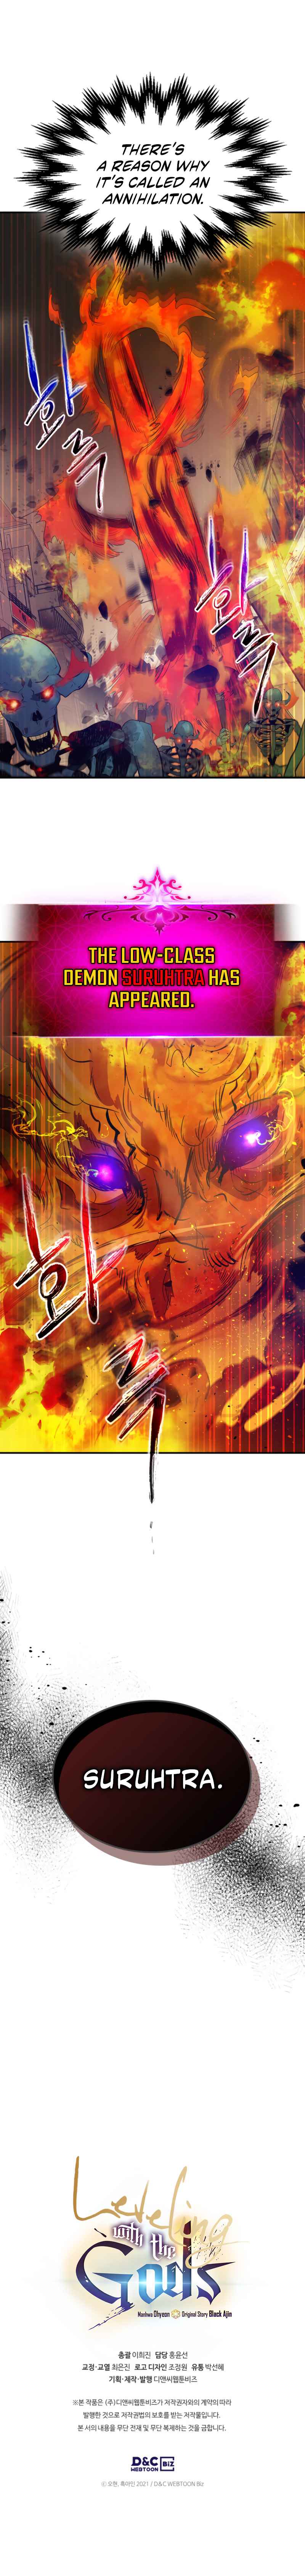 Leveling With The Gods Chapter 12, Leveling With The Gods 12, Read Leveling With The Gods Chapter 12, Leveling With The Gods Chapter 12 Manga, Leveling With The Gods Chapter 12 english, Leveling With The Gods Chapter 12 raw manga, Leveling With The Gods Chapter 12 online, Leveling With The Gods Chapter 12 high quality, Leveling With The Gods 12 chapter, Leveling With The Gods Chapter 12 manga scan